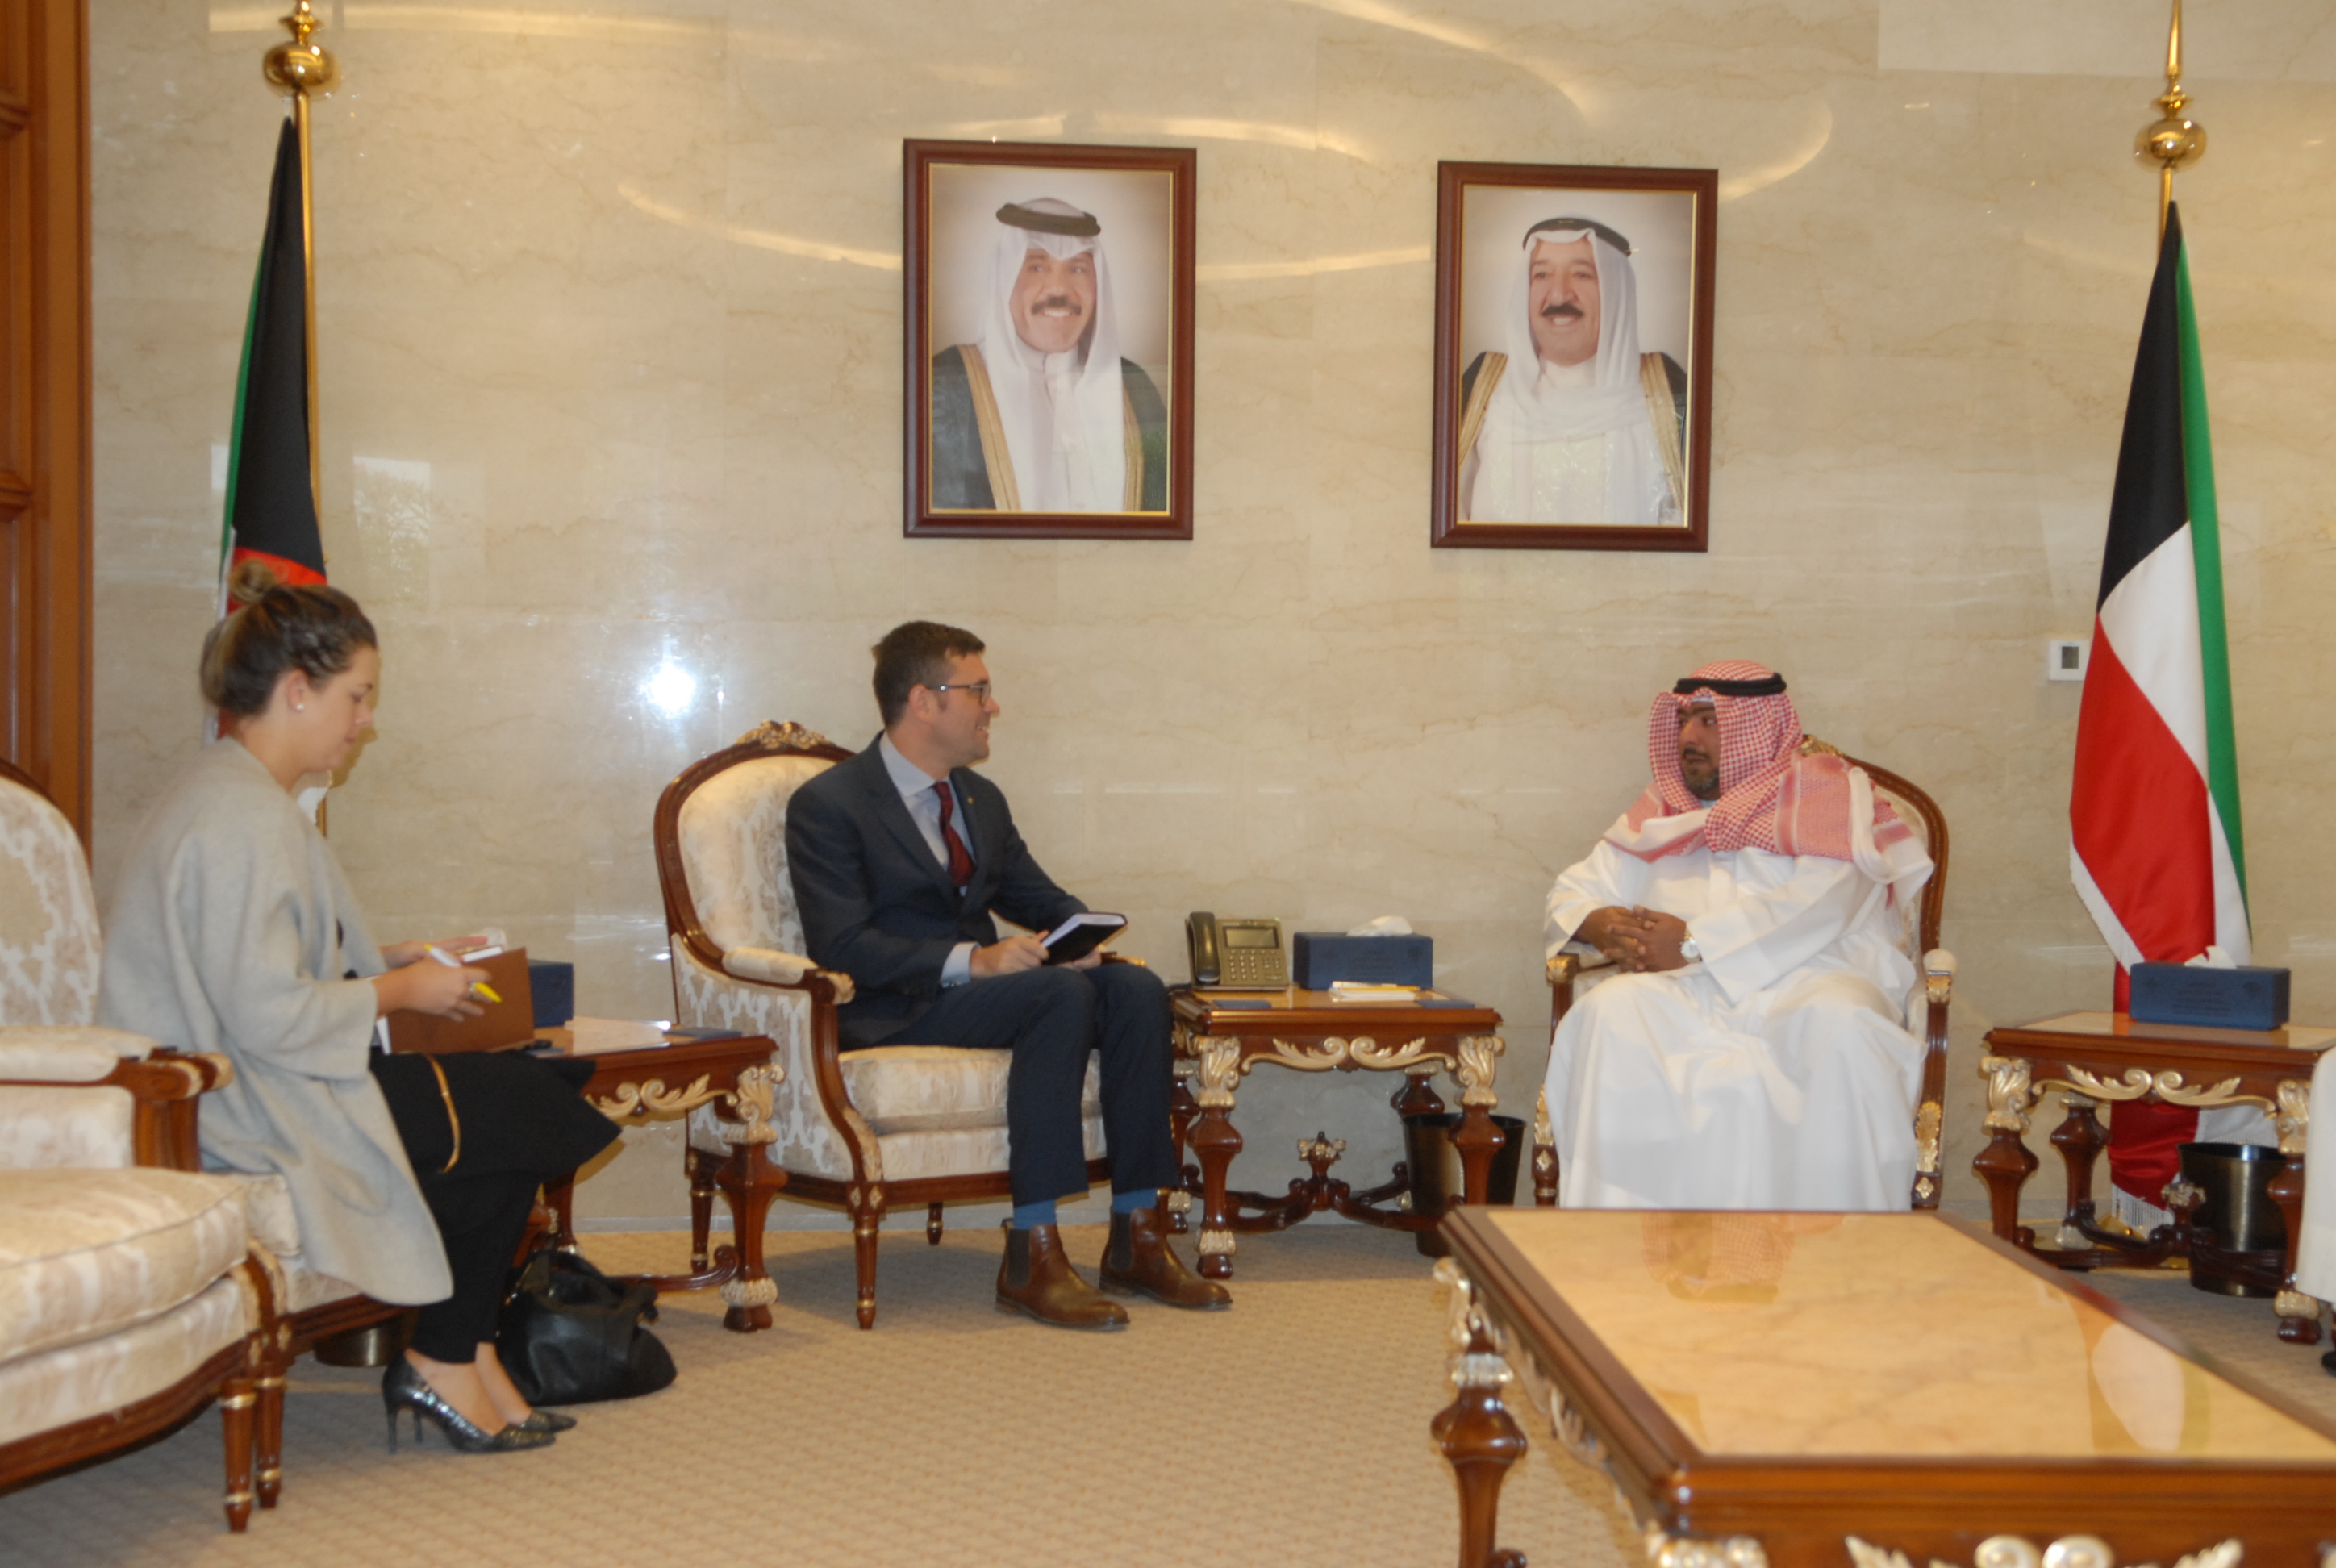 Kuwait National Security chief discusses cooperation with Australian envoy